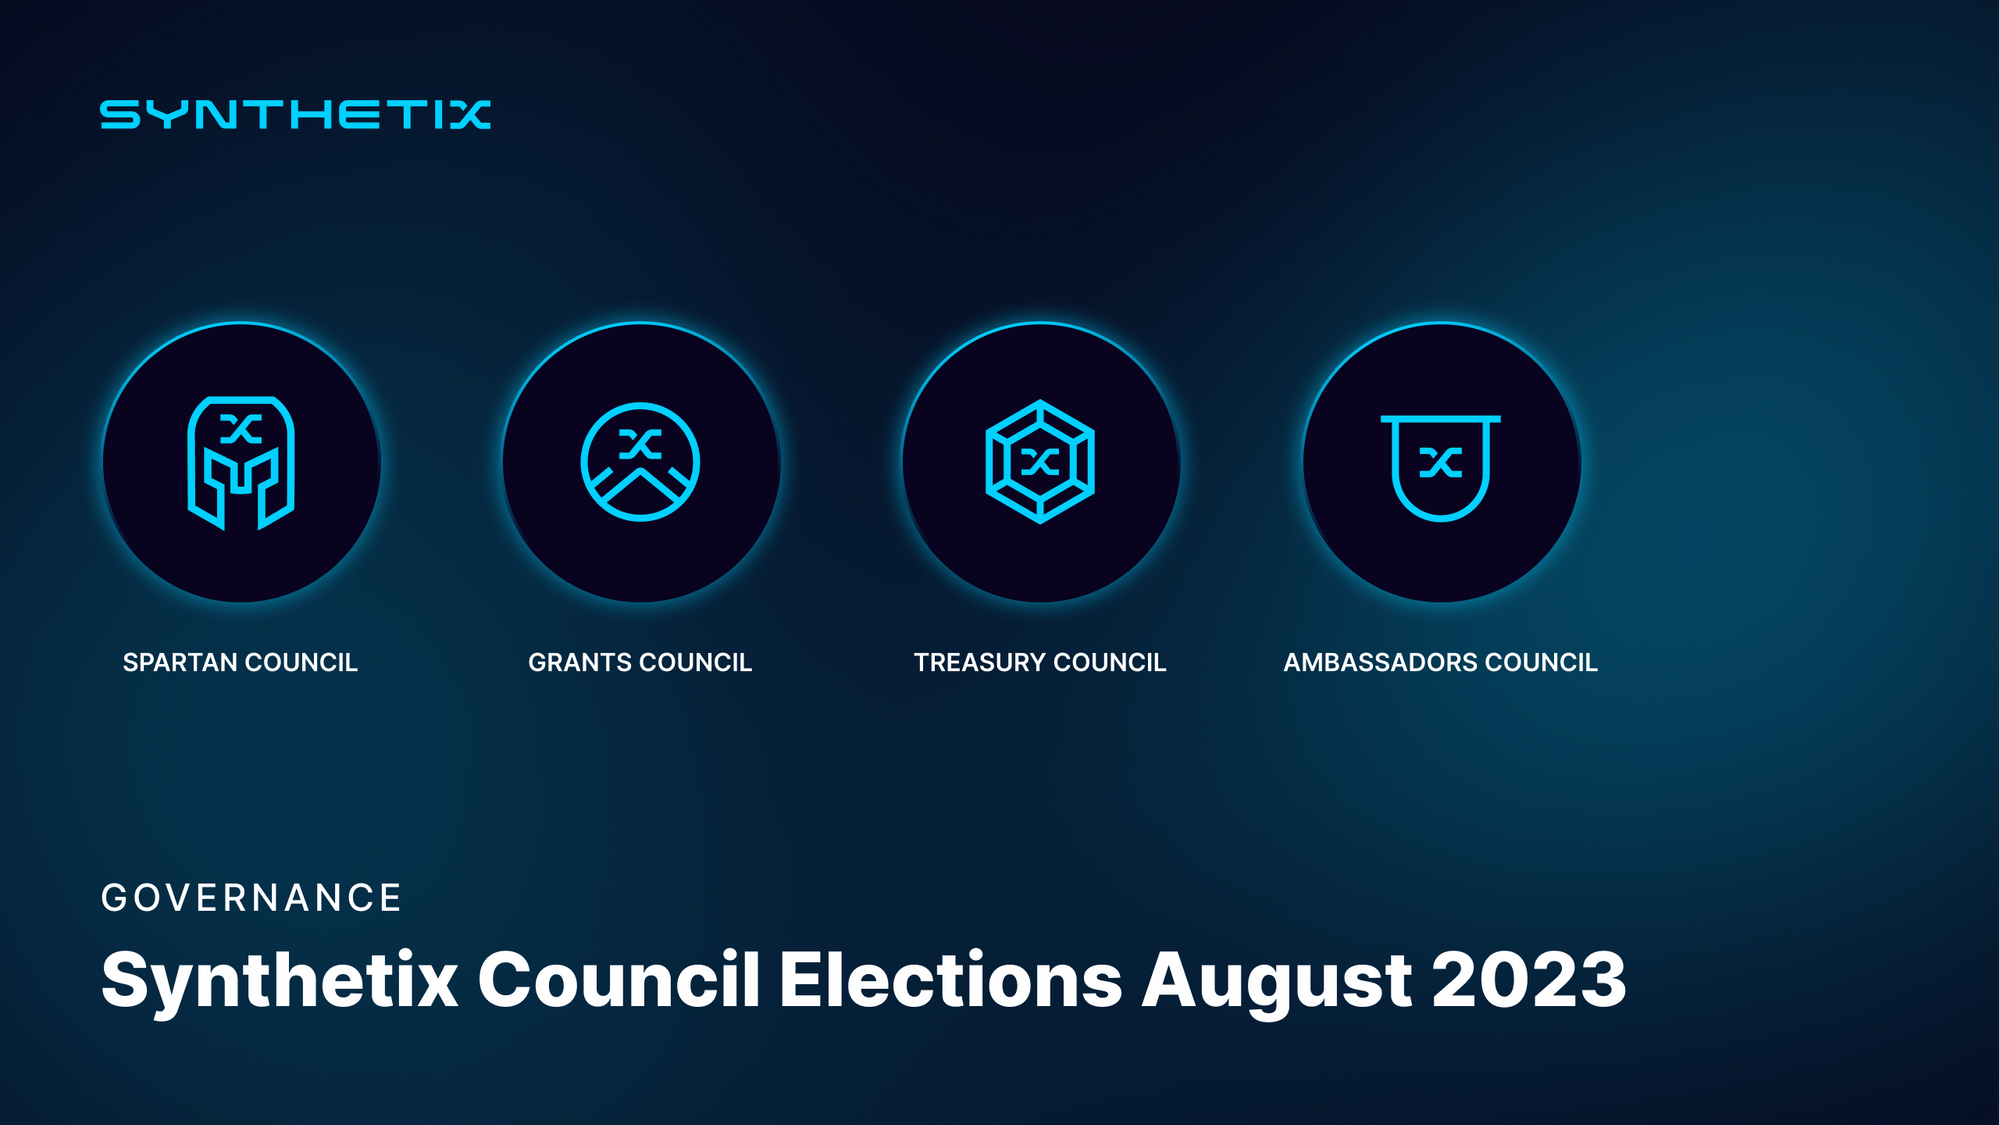 Synthetix Governance Elections - August 2023